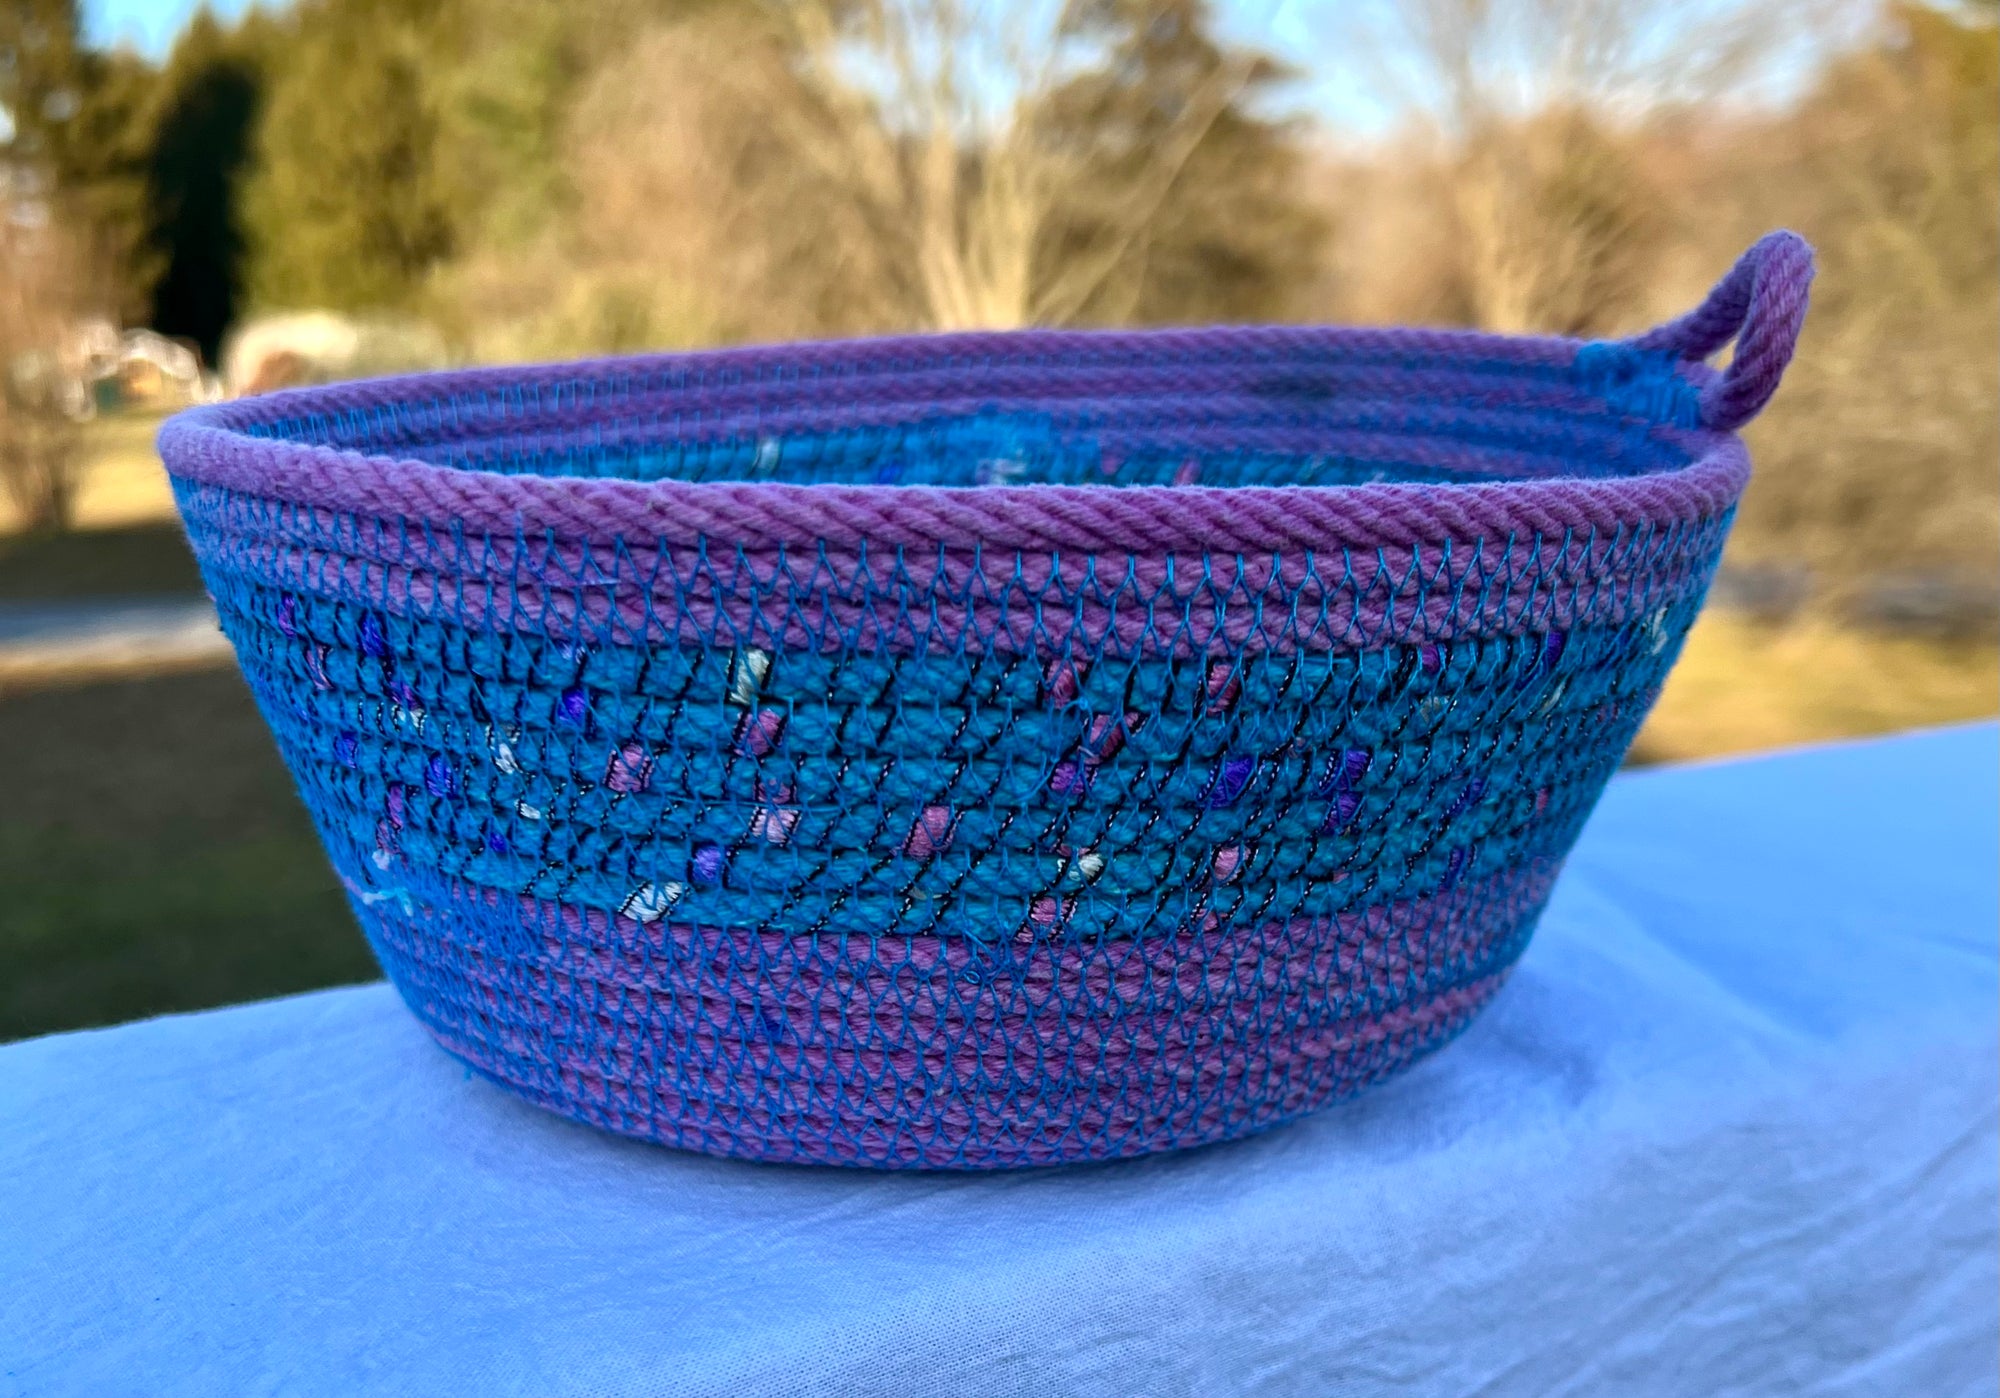 Coiled Rope Planter Lavendar and Teal